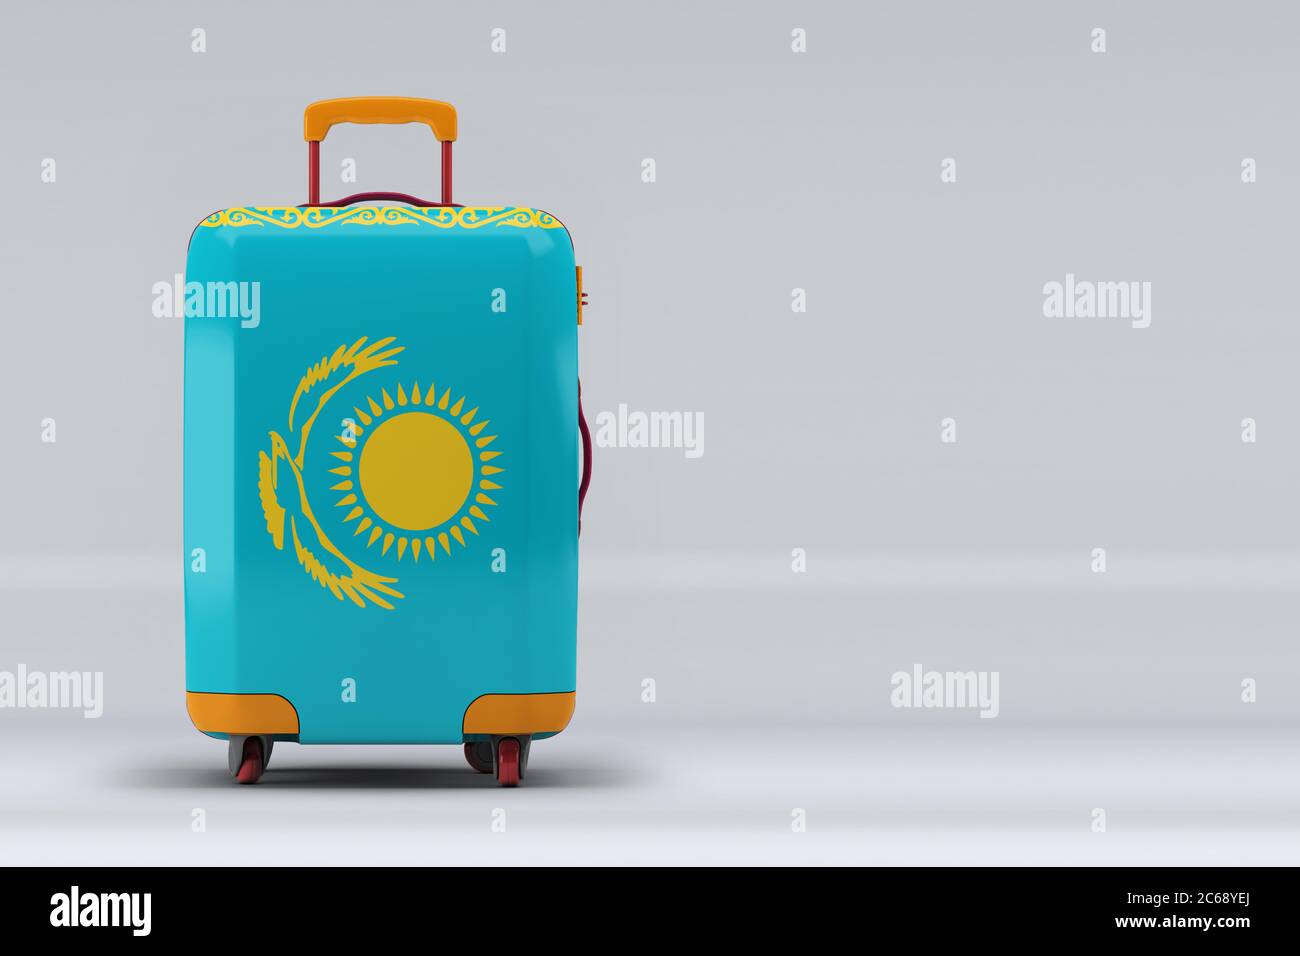 Kazakhstan national flag on a stylish suitcases on color background. Space for text. International travel and tourism concept. 3D rendering. Stock Photo